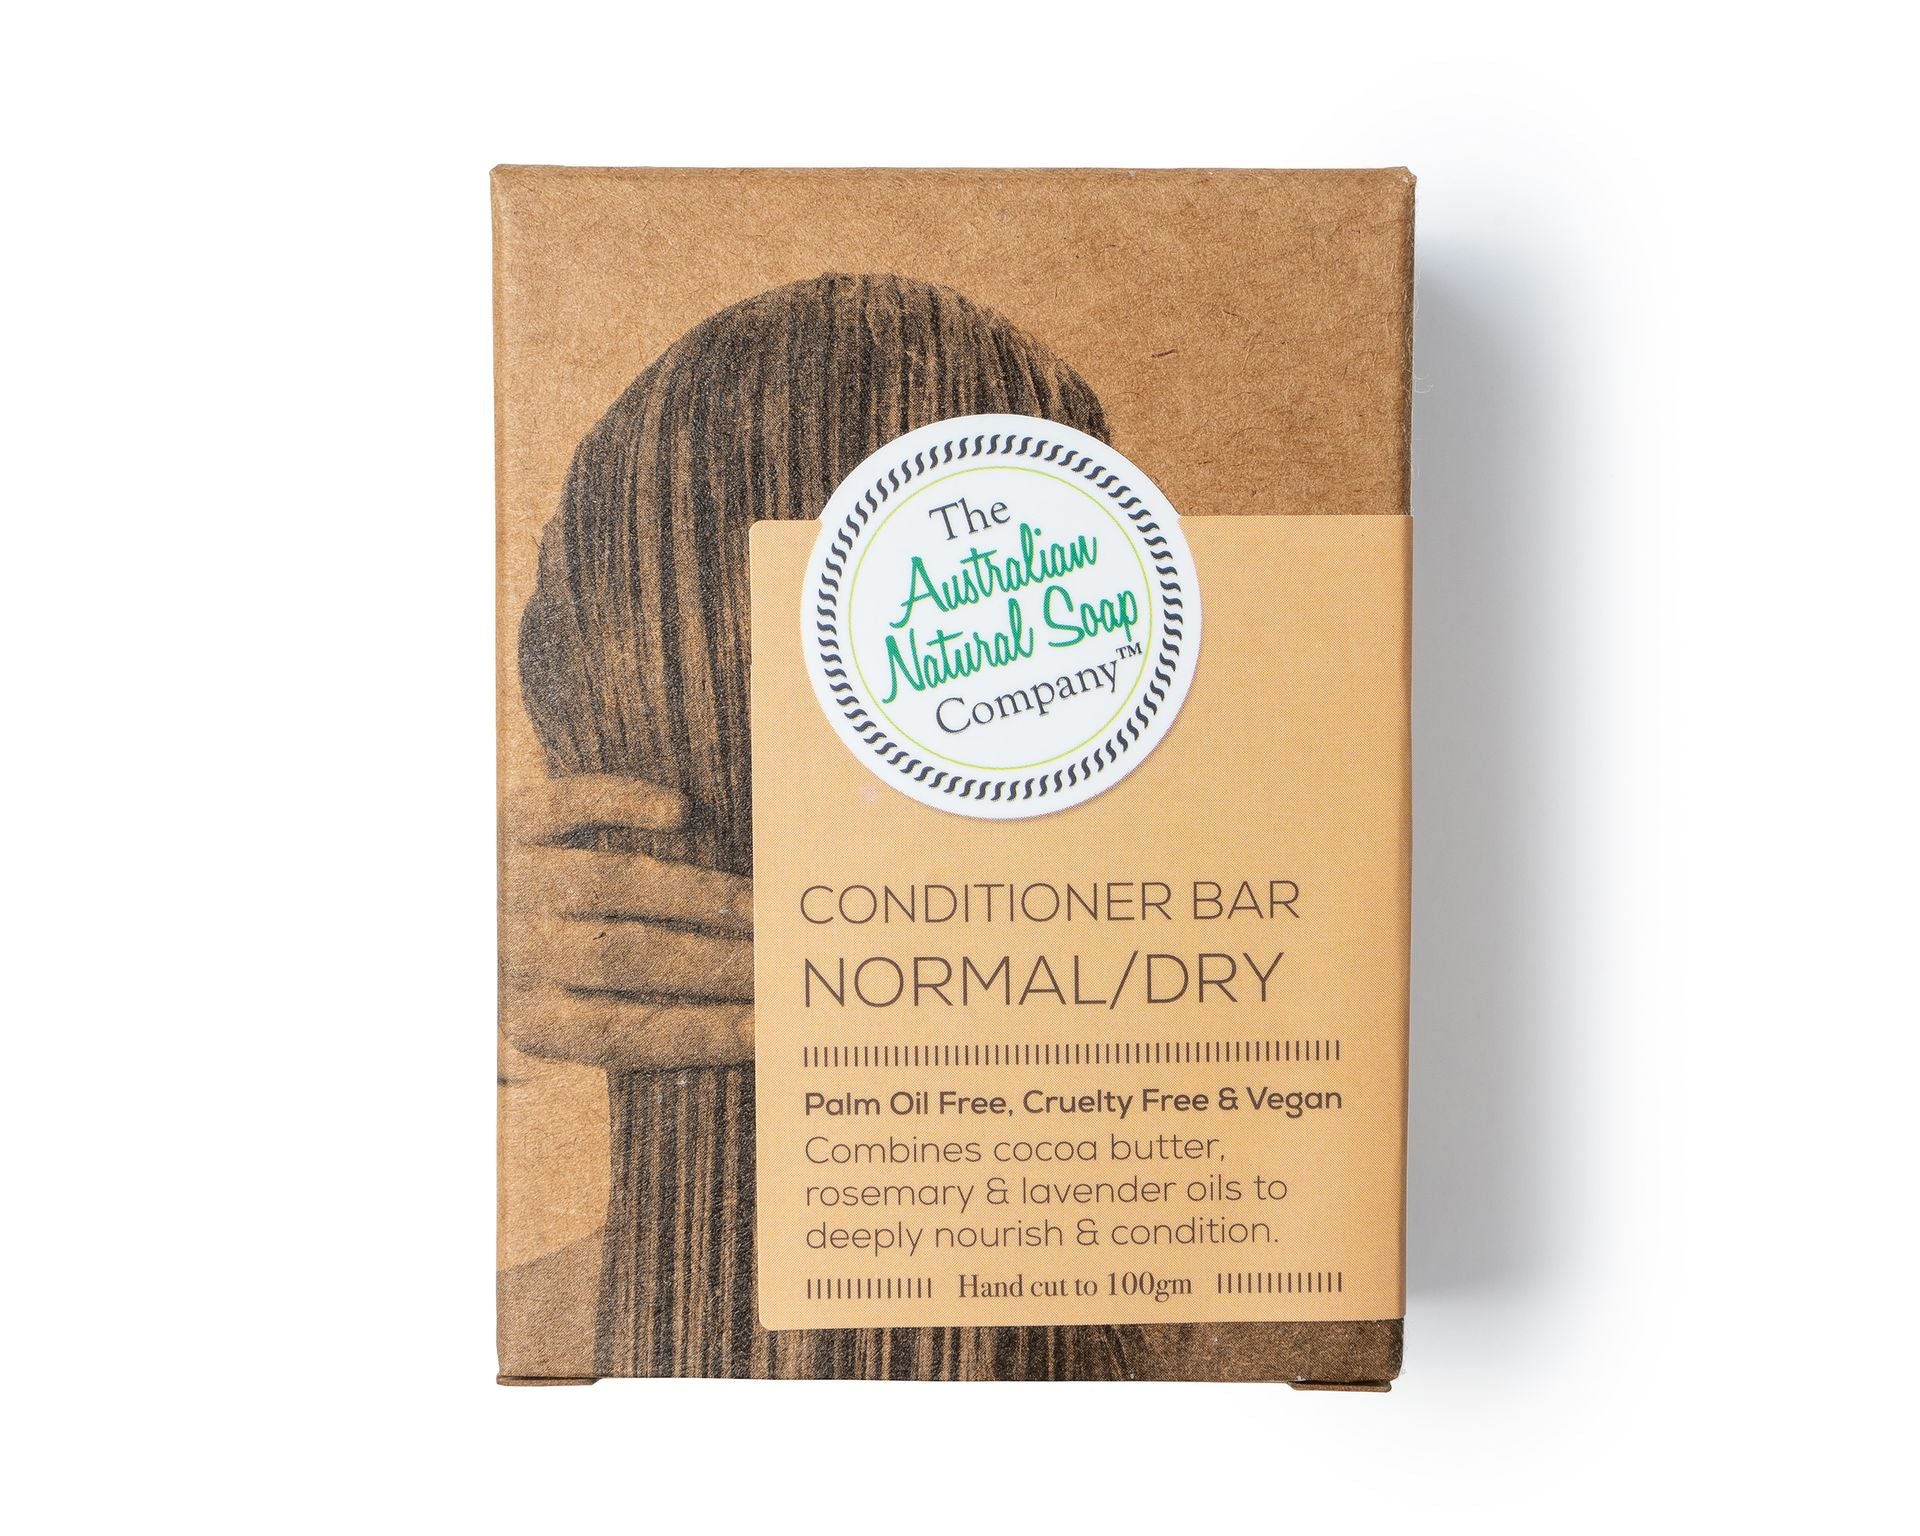 Heritage Normal/Dry Conditioner